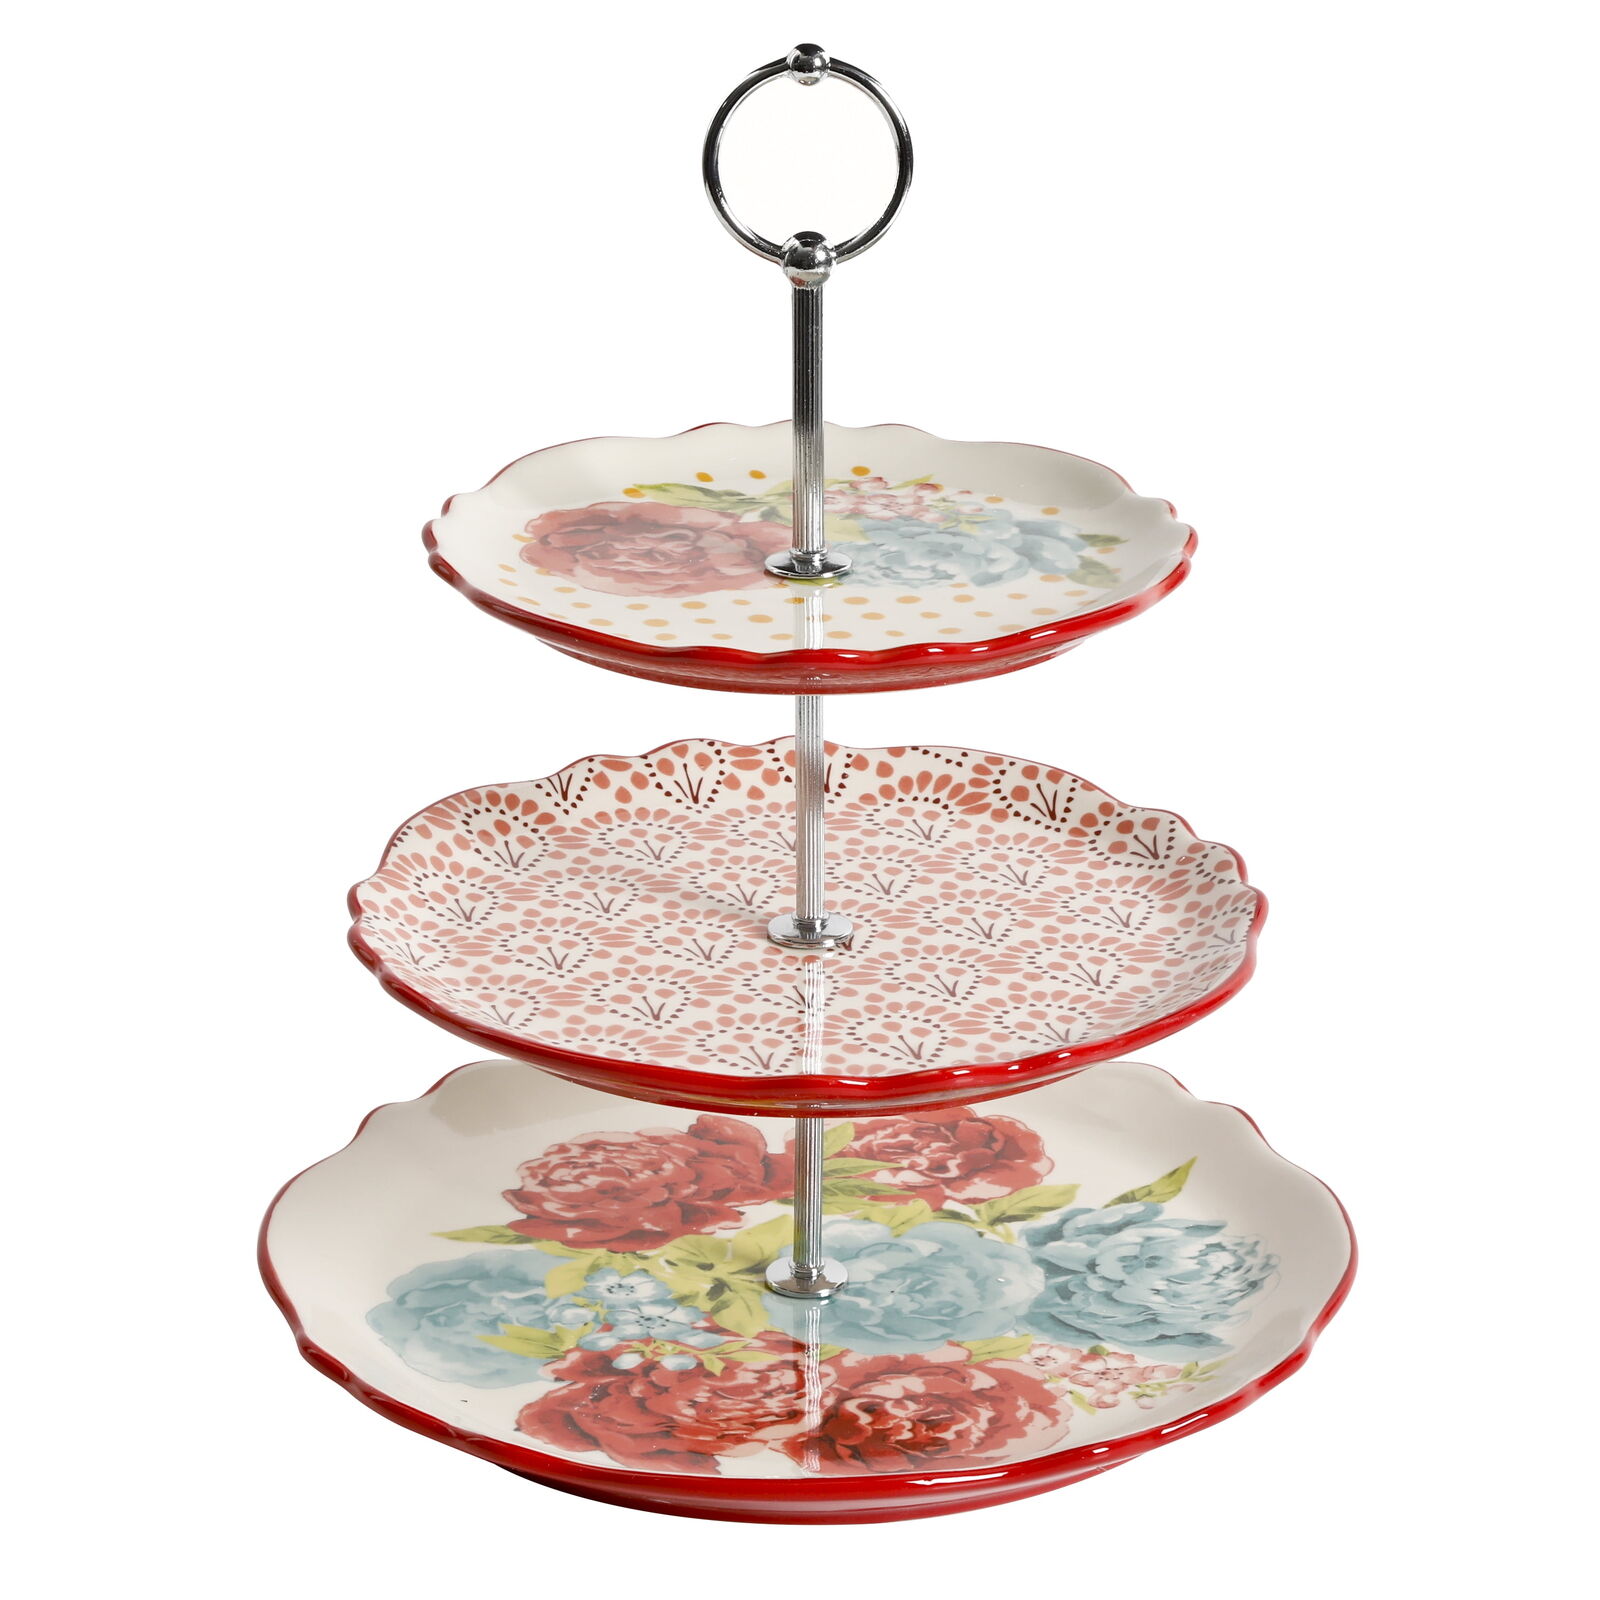 The Pioner Woman Blossom Jubilee 3-Tier Serving Tray